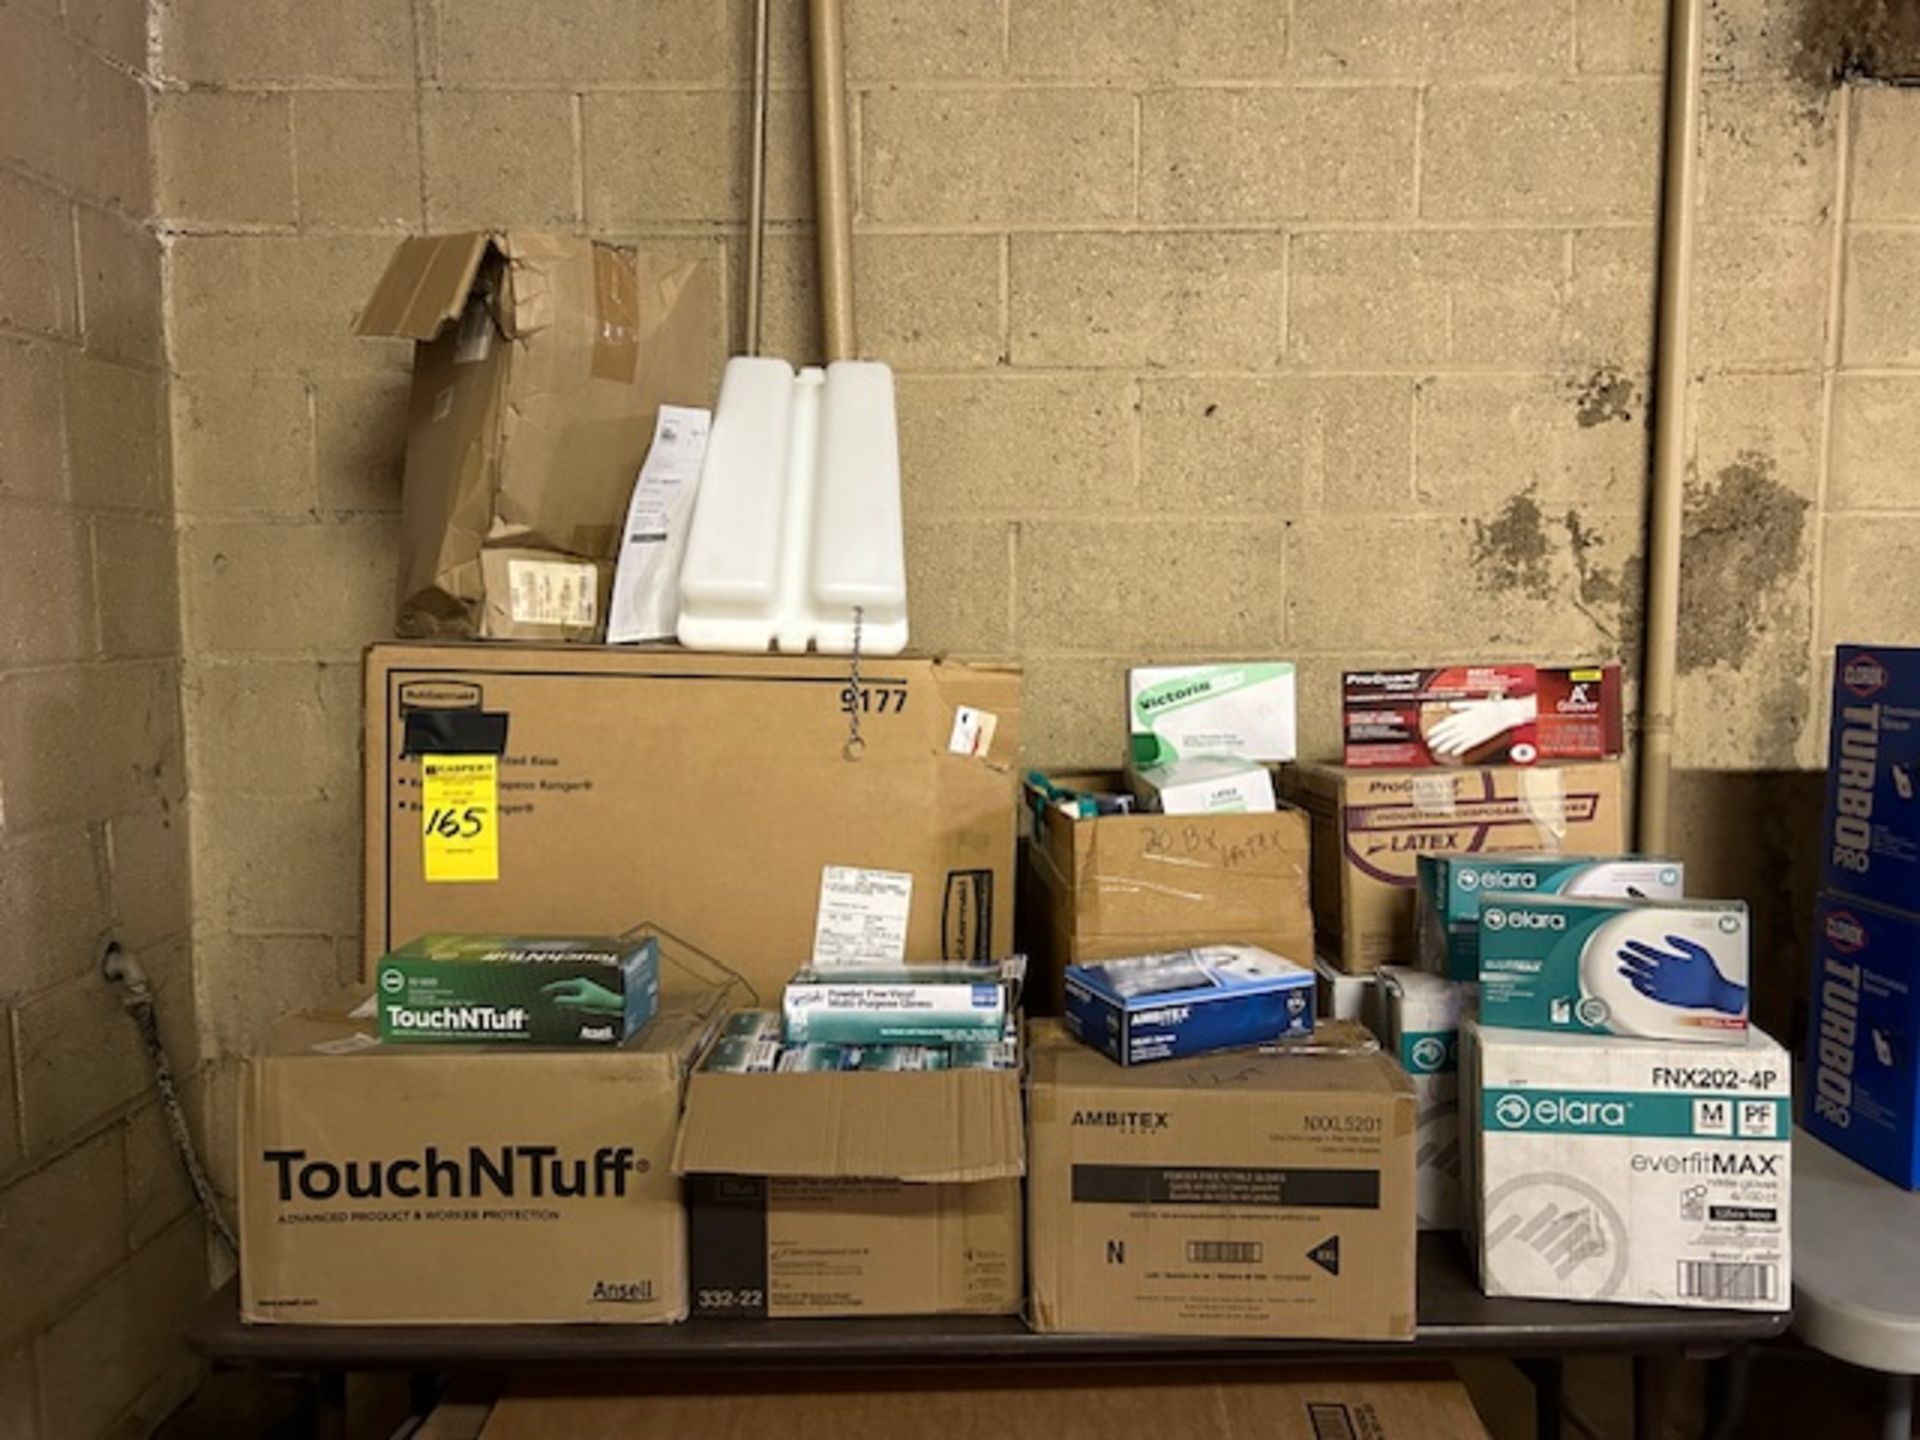 LOT - Assorted Vinyl and Latex Gloves (Approx 80 Boxes) and other Janitorial Supplies